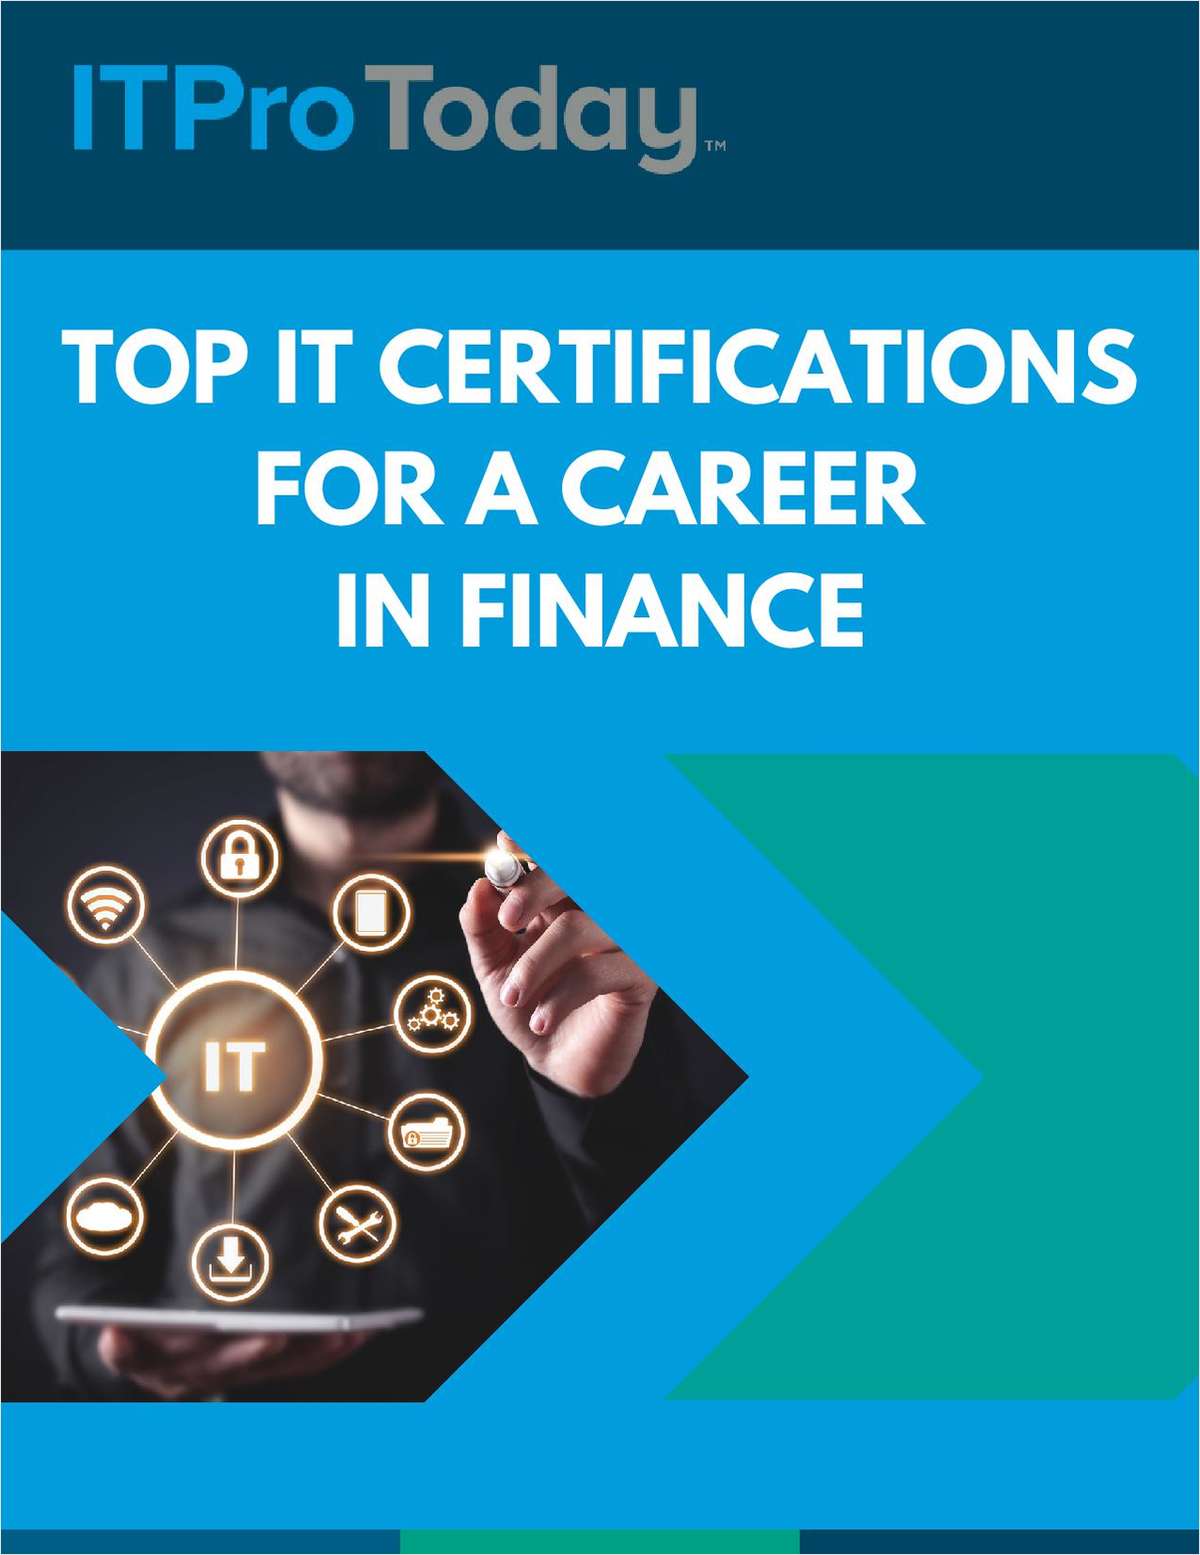 Top IT Certifications for a Career in Finance